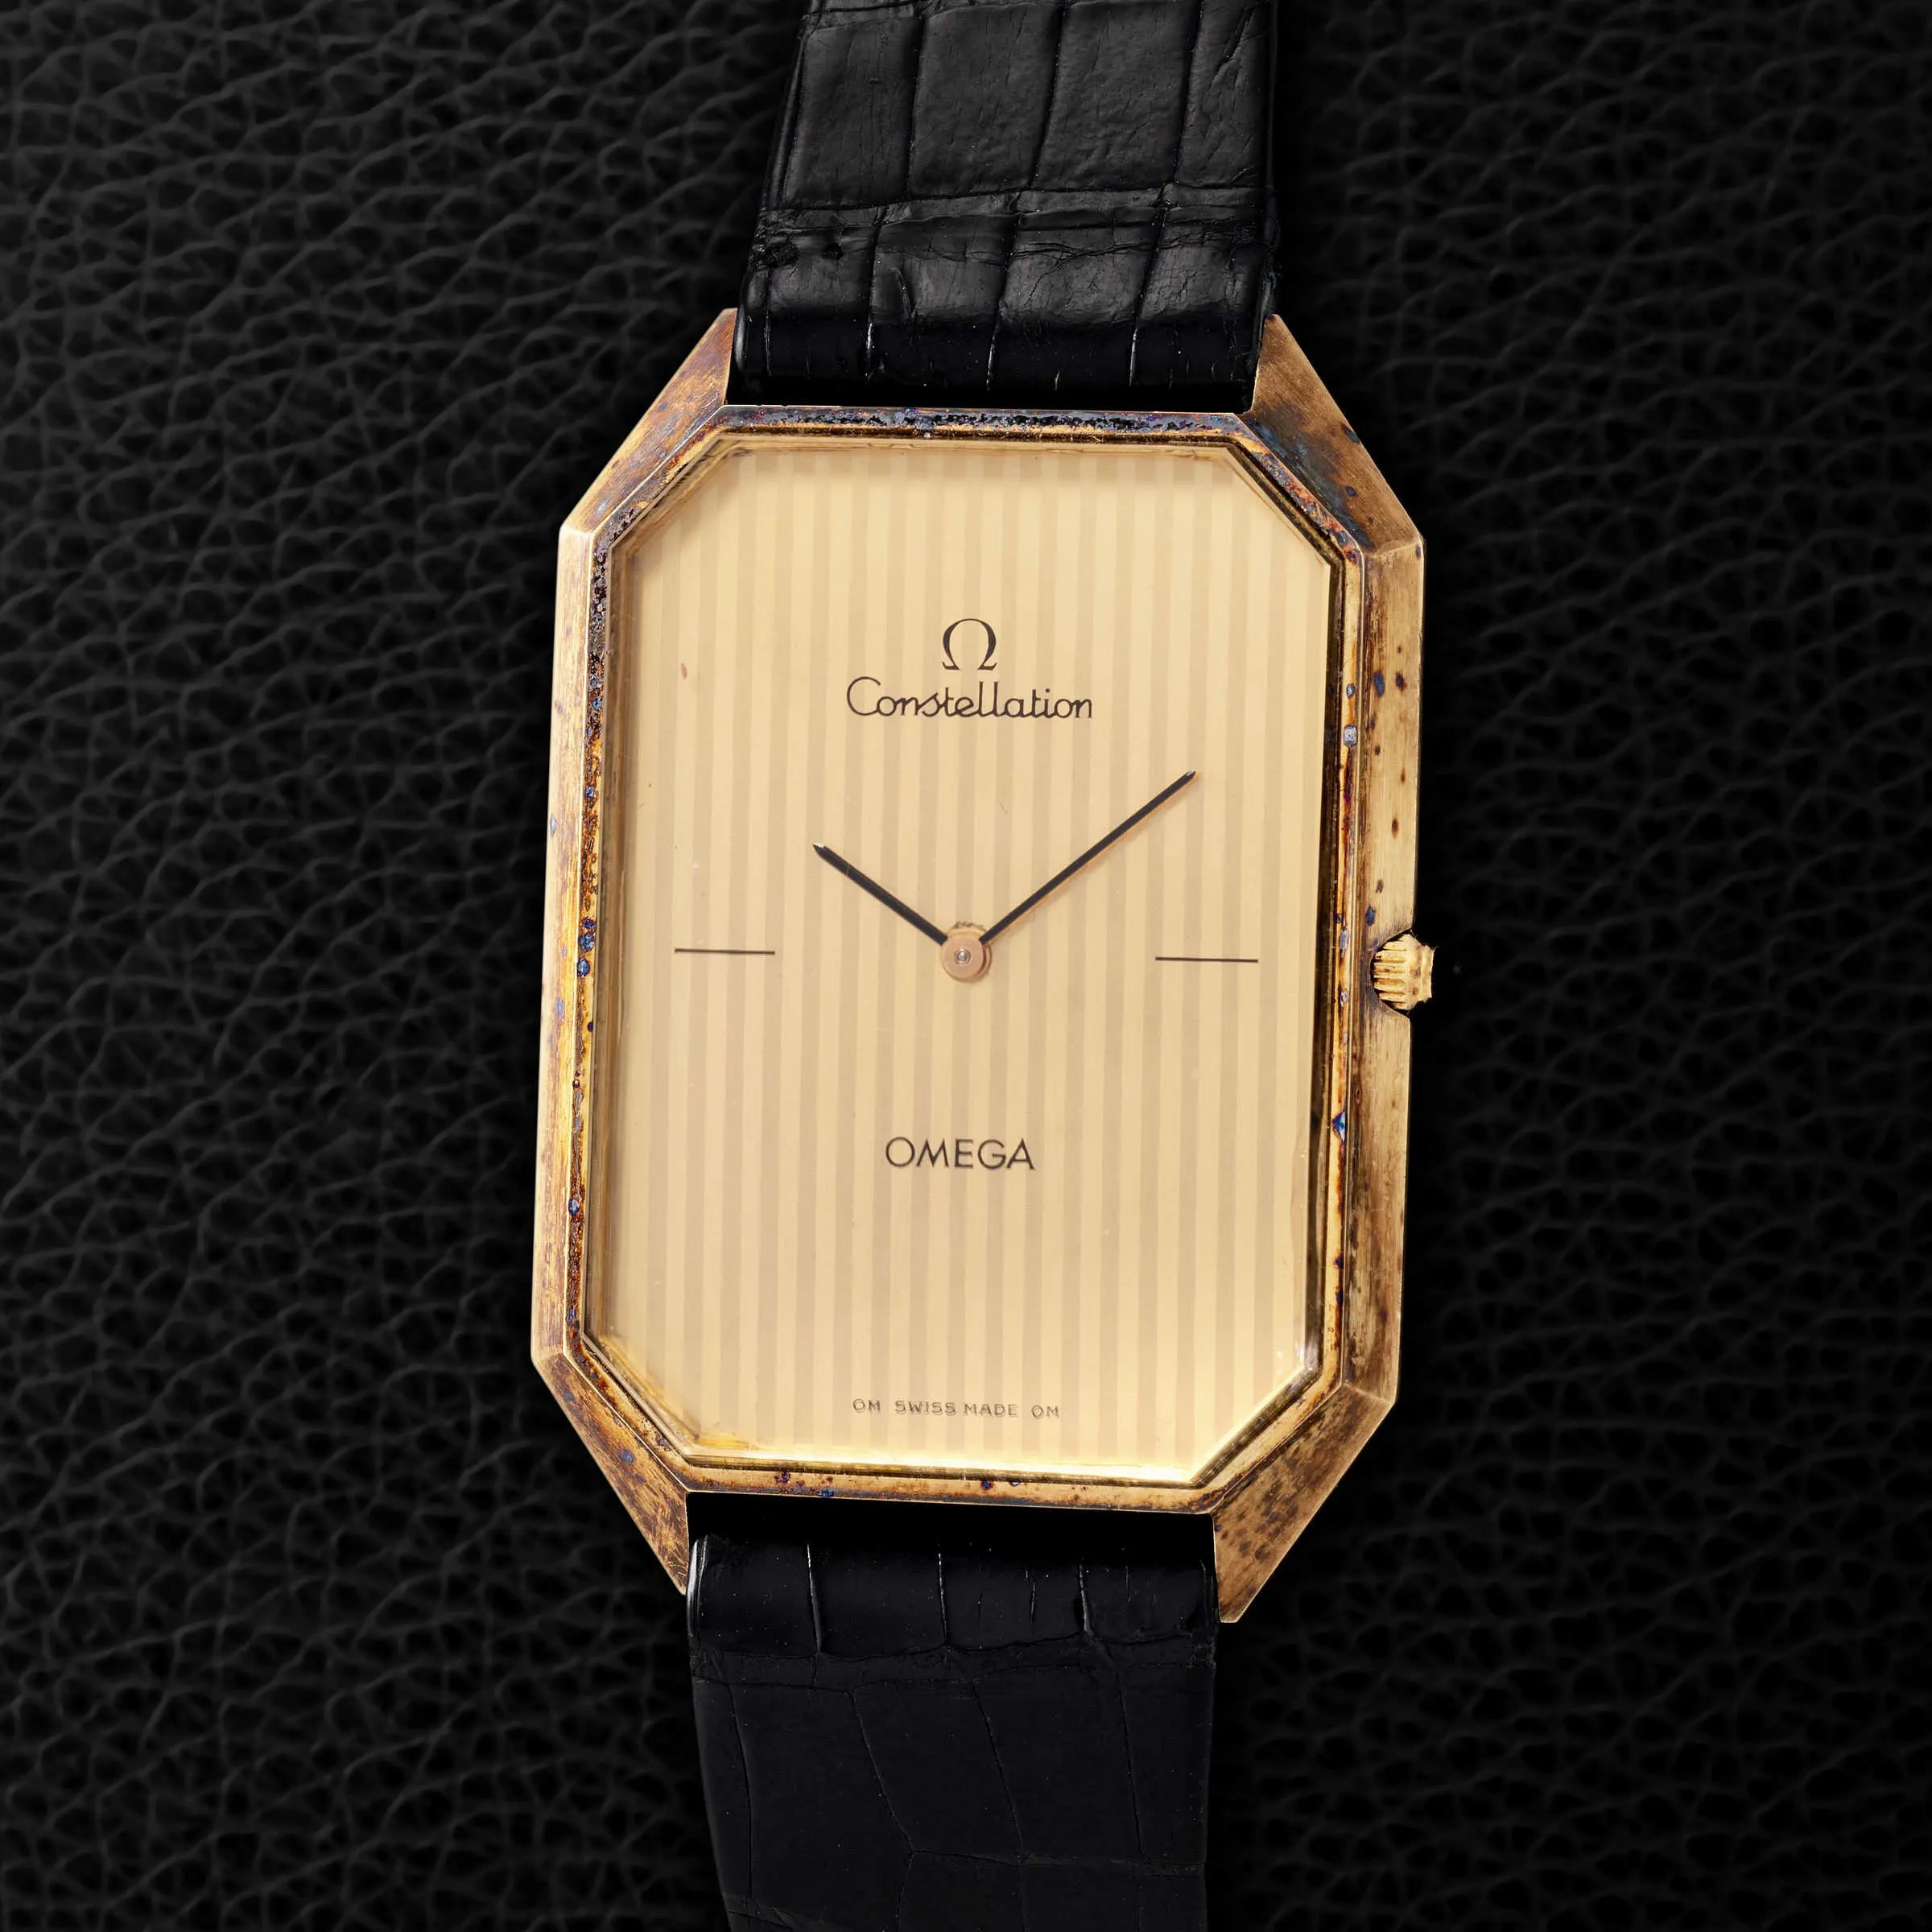 Omega Constellation BA 111.104 30mm Yellow gold Champagne